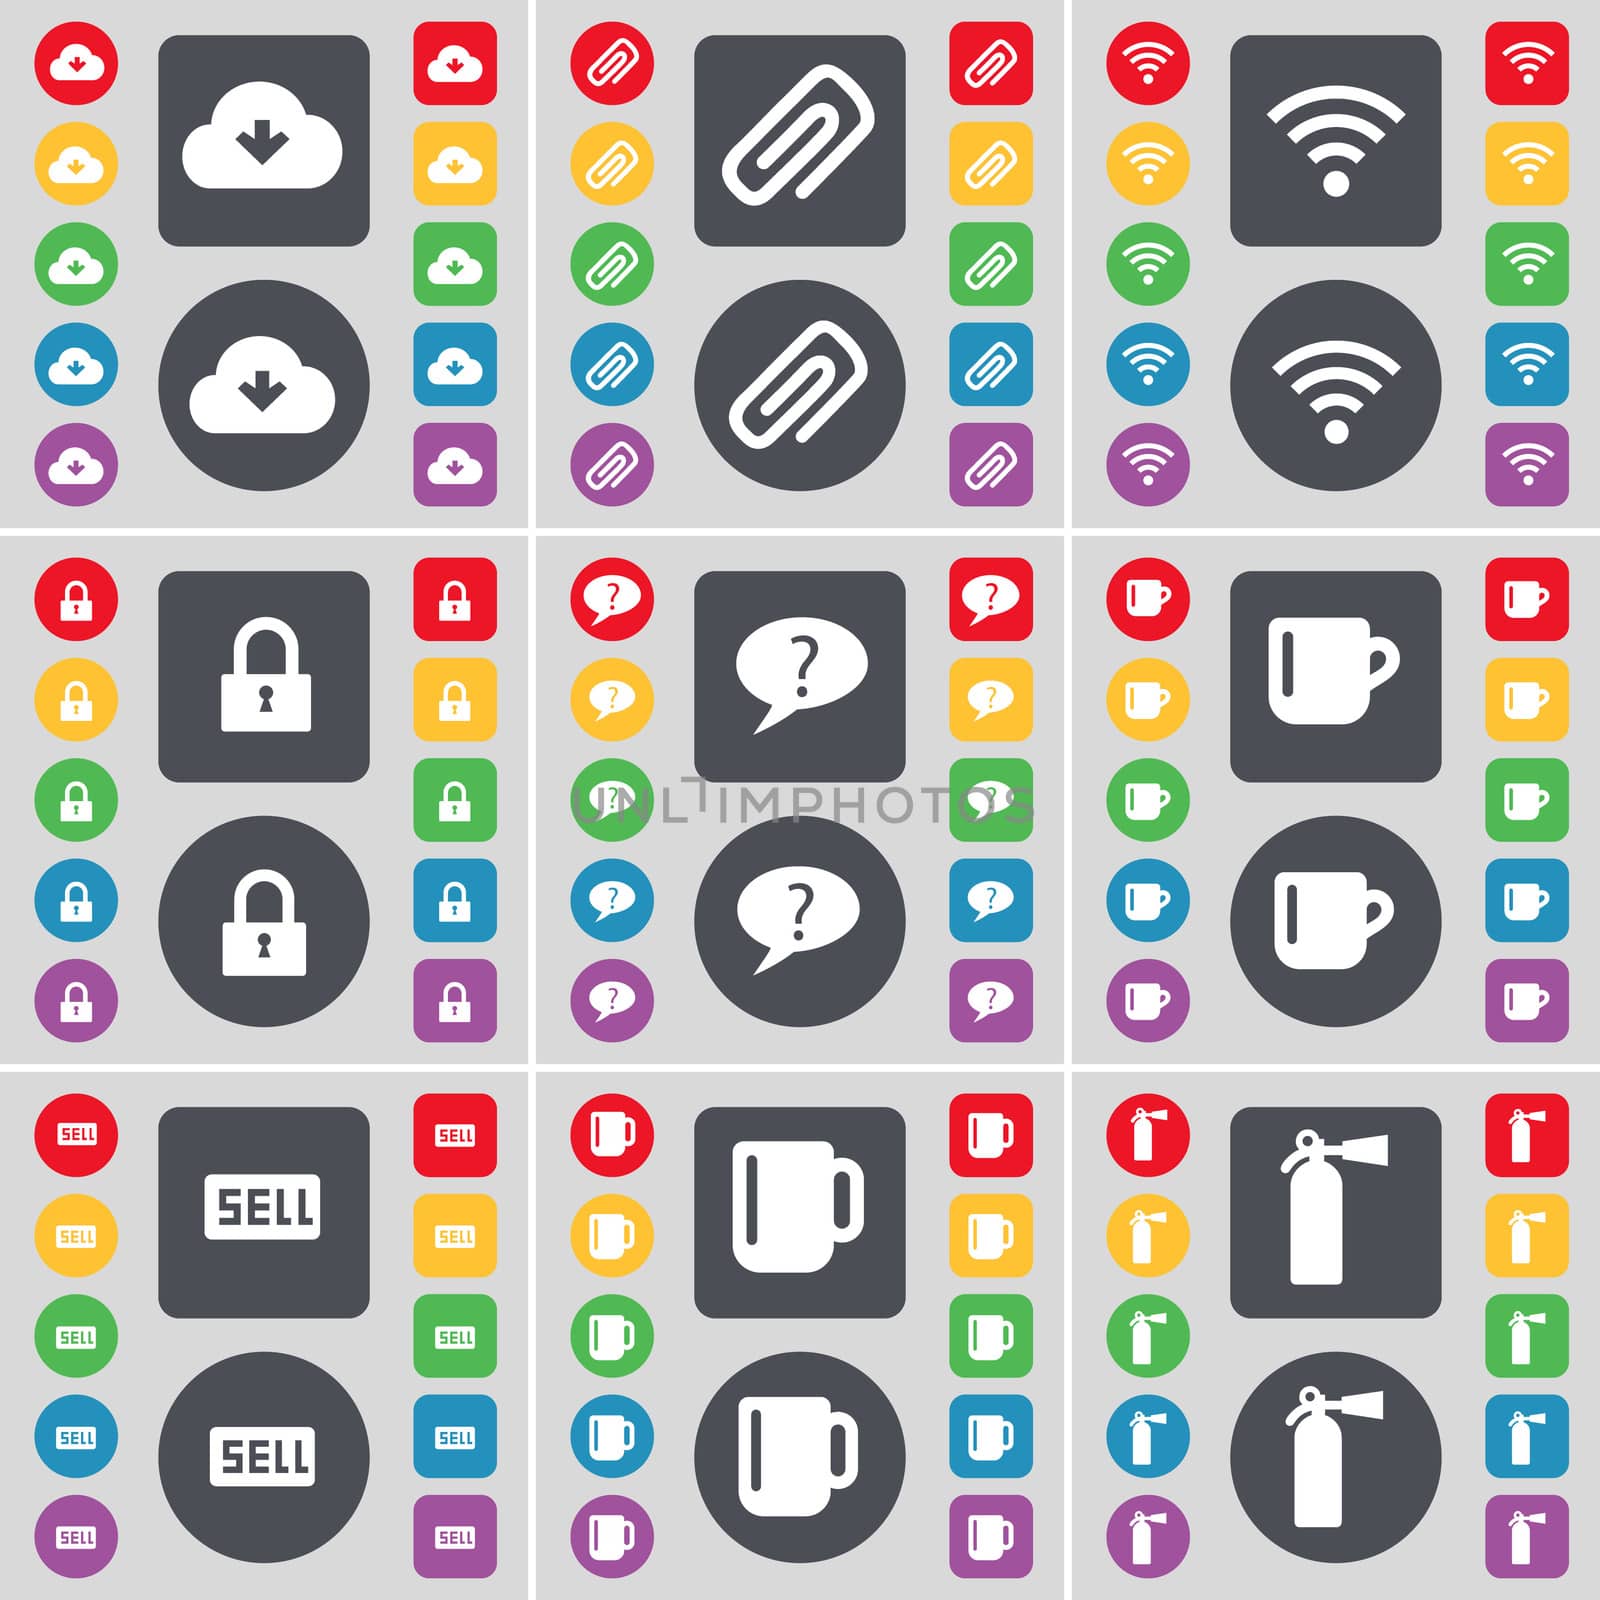 Cloud, Clip, Wi-Fi, Lock, Chat bubble, Cup, Sell, Cup, Fire extinguisher icon symbol. A large set of flat, colored buttons for your design. illustration